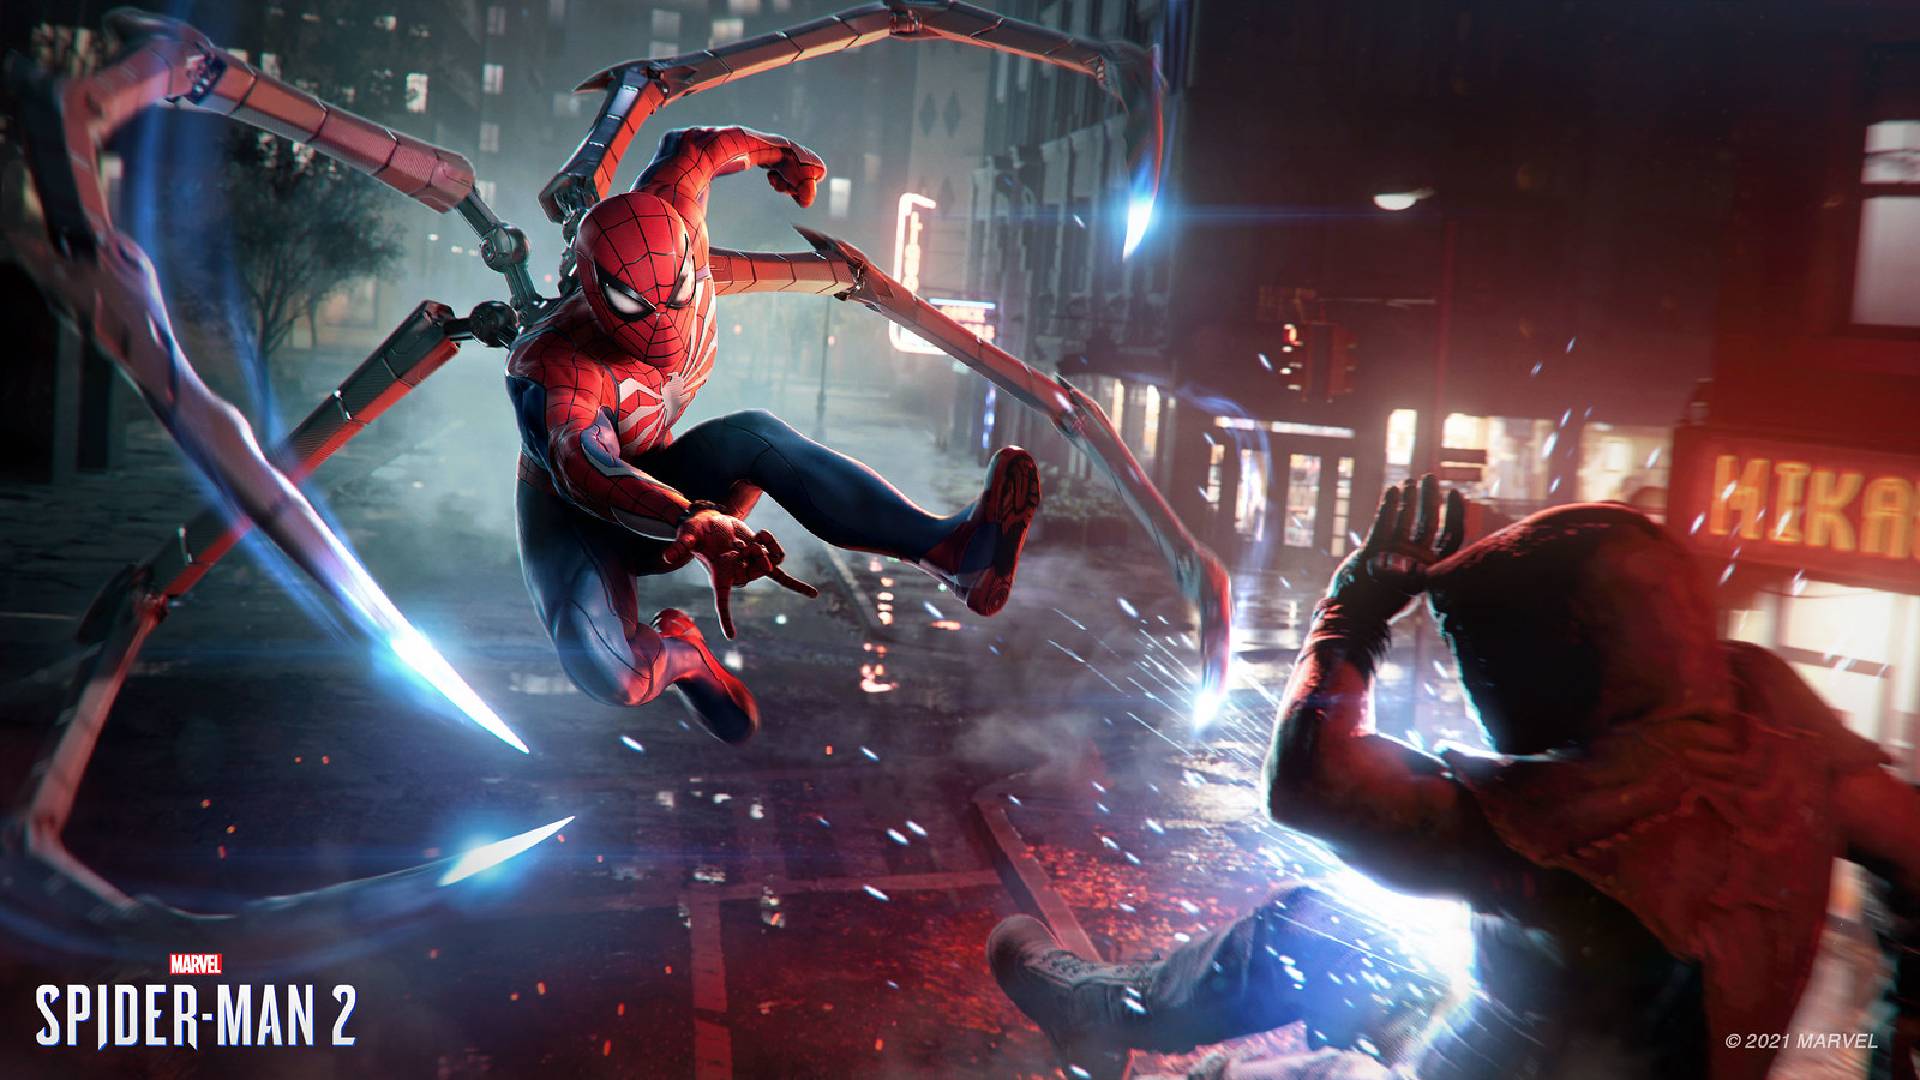 Marvel's Spider-Man 2' Release Date Finally Confirmed - HorrorGeekLife